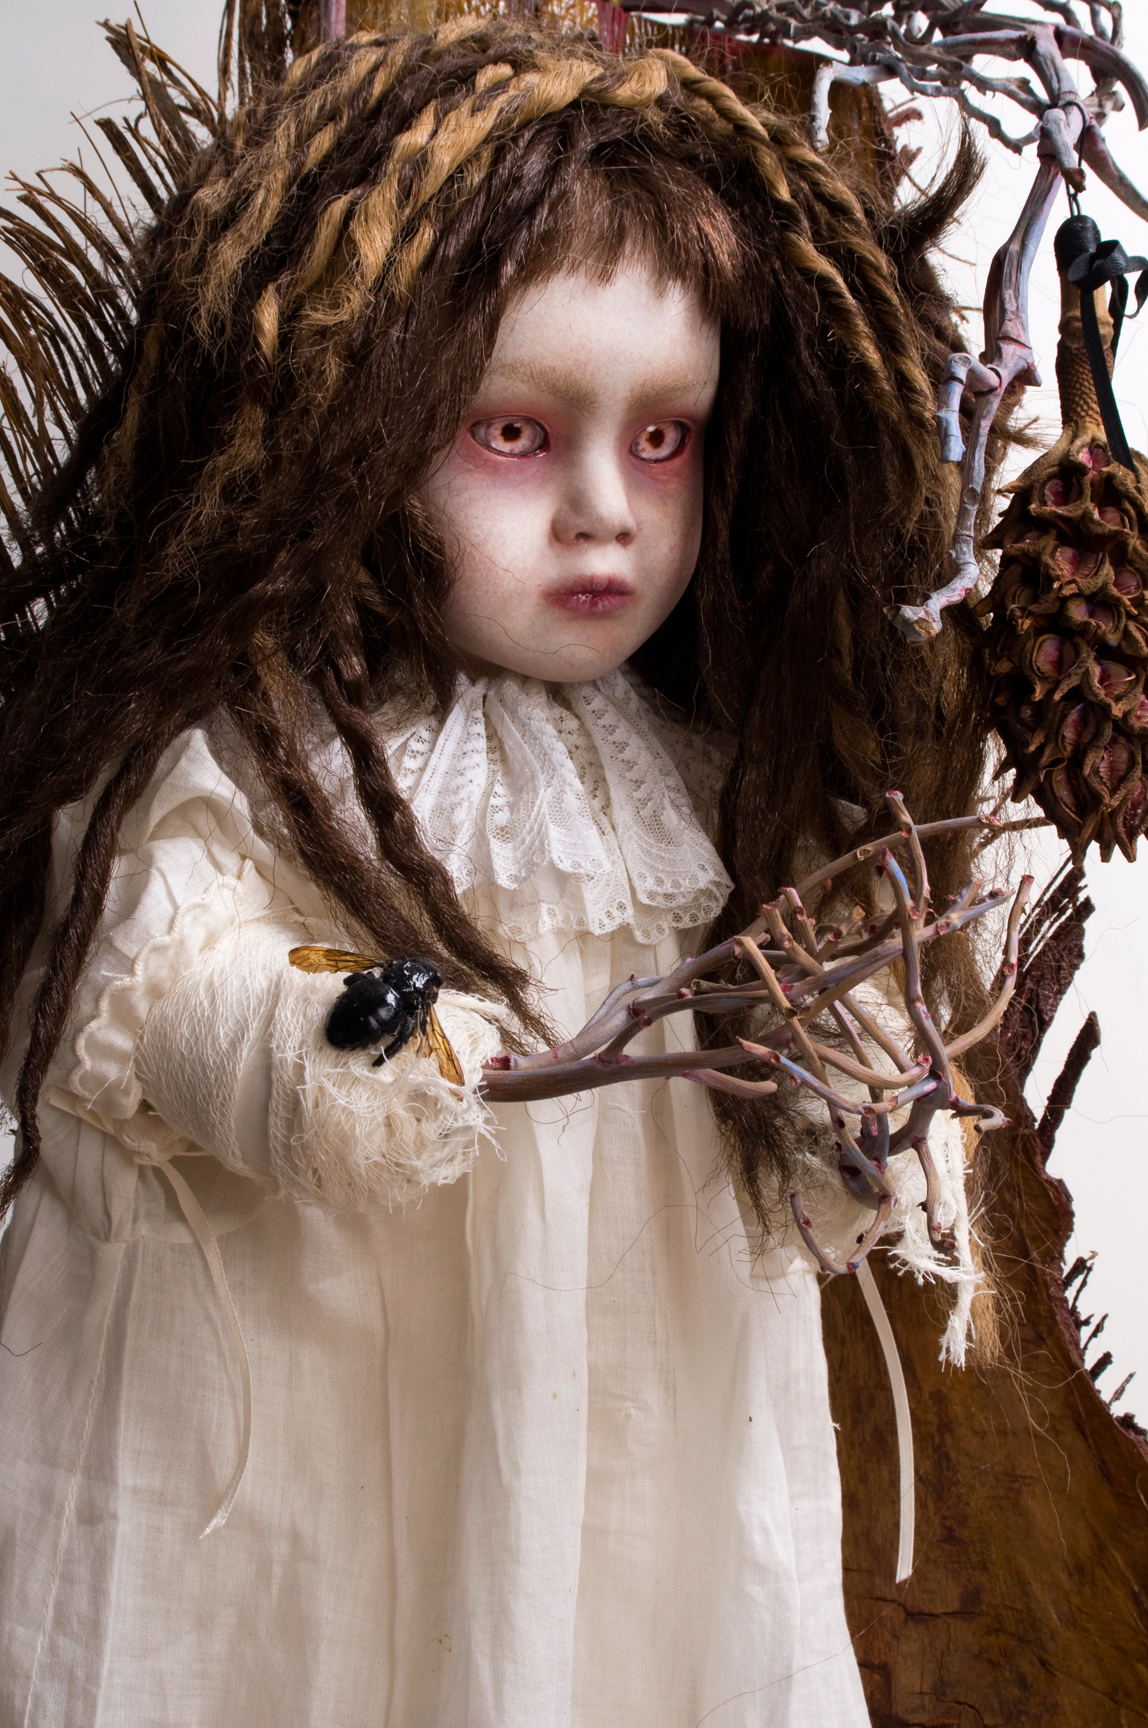 gothic artdoll mixed media damsel with gnarled branches in place of her severed hands wearing white nightie